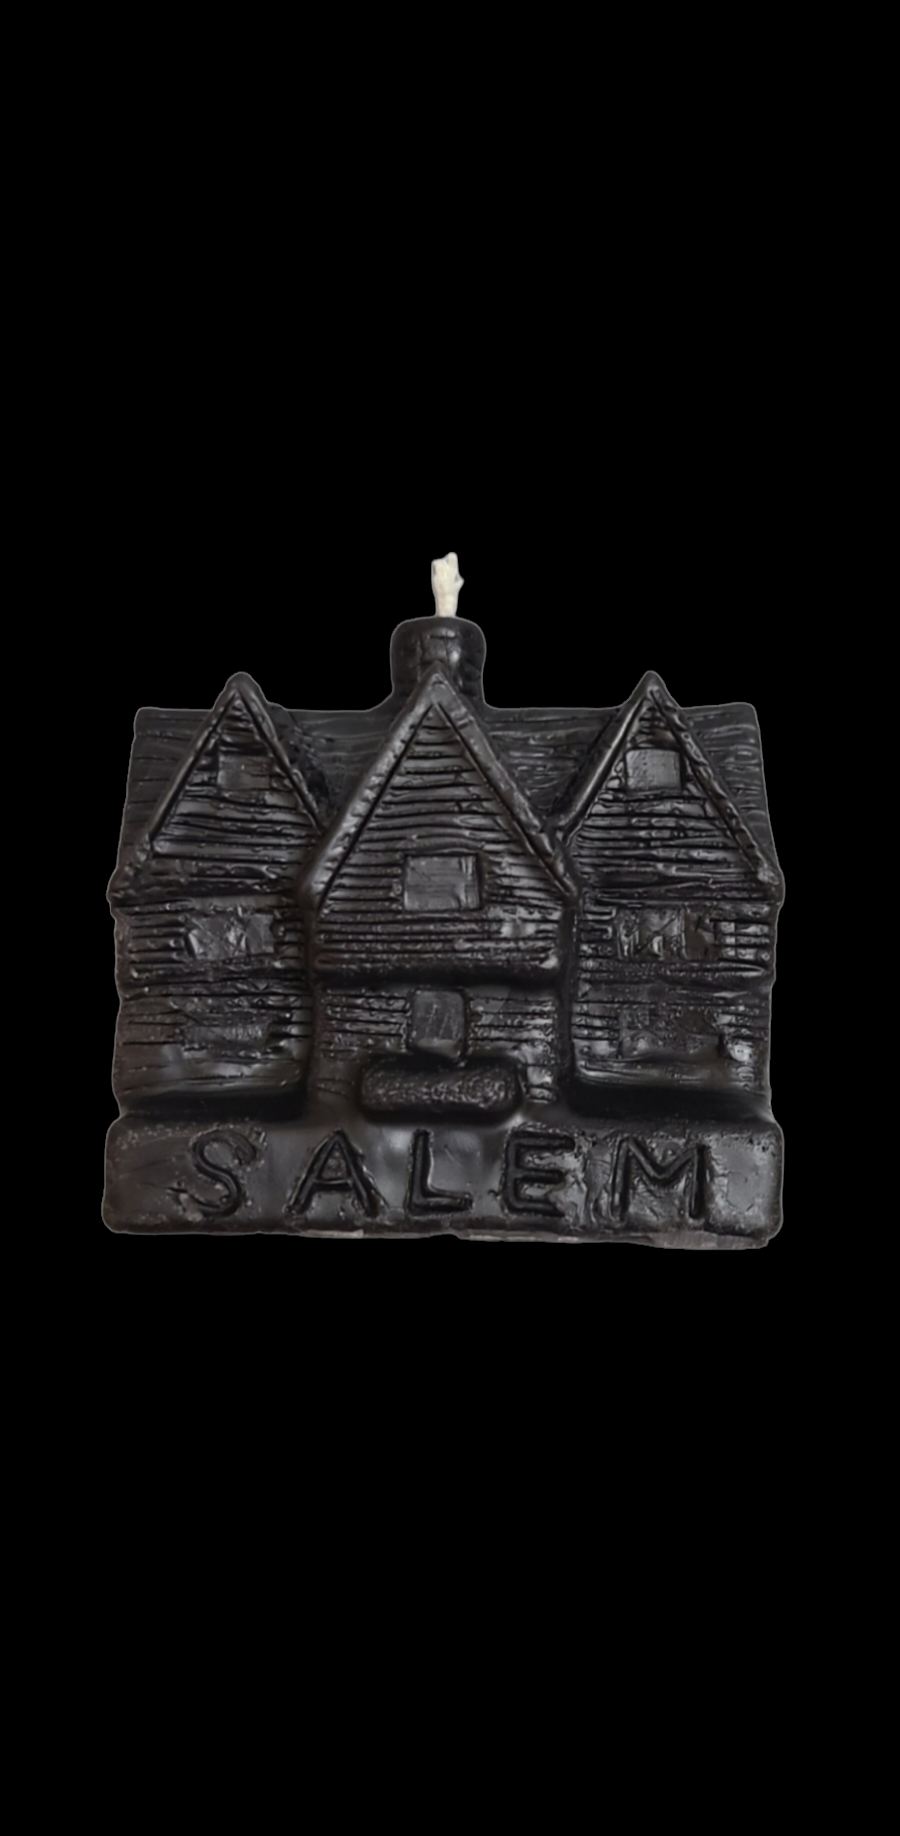 Iconic Salem Witch House candle